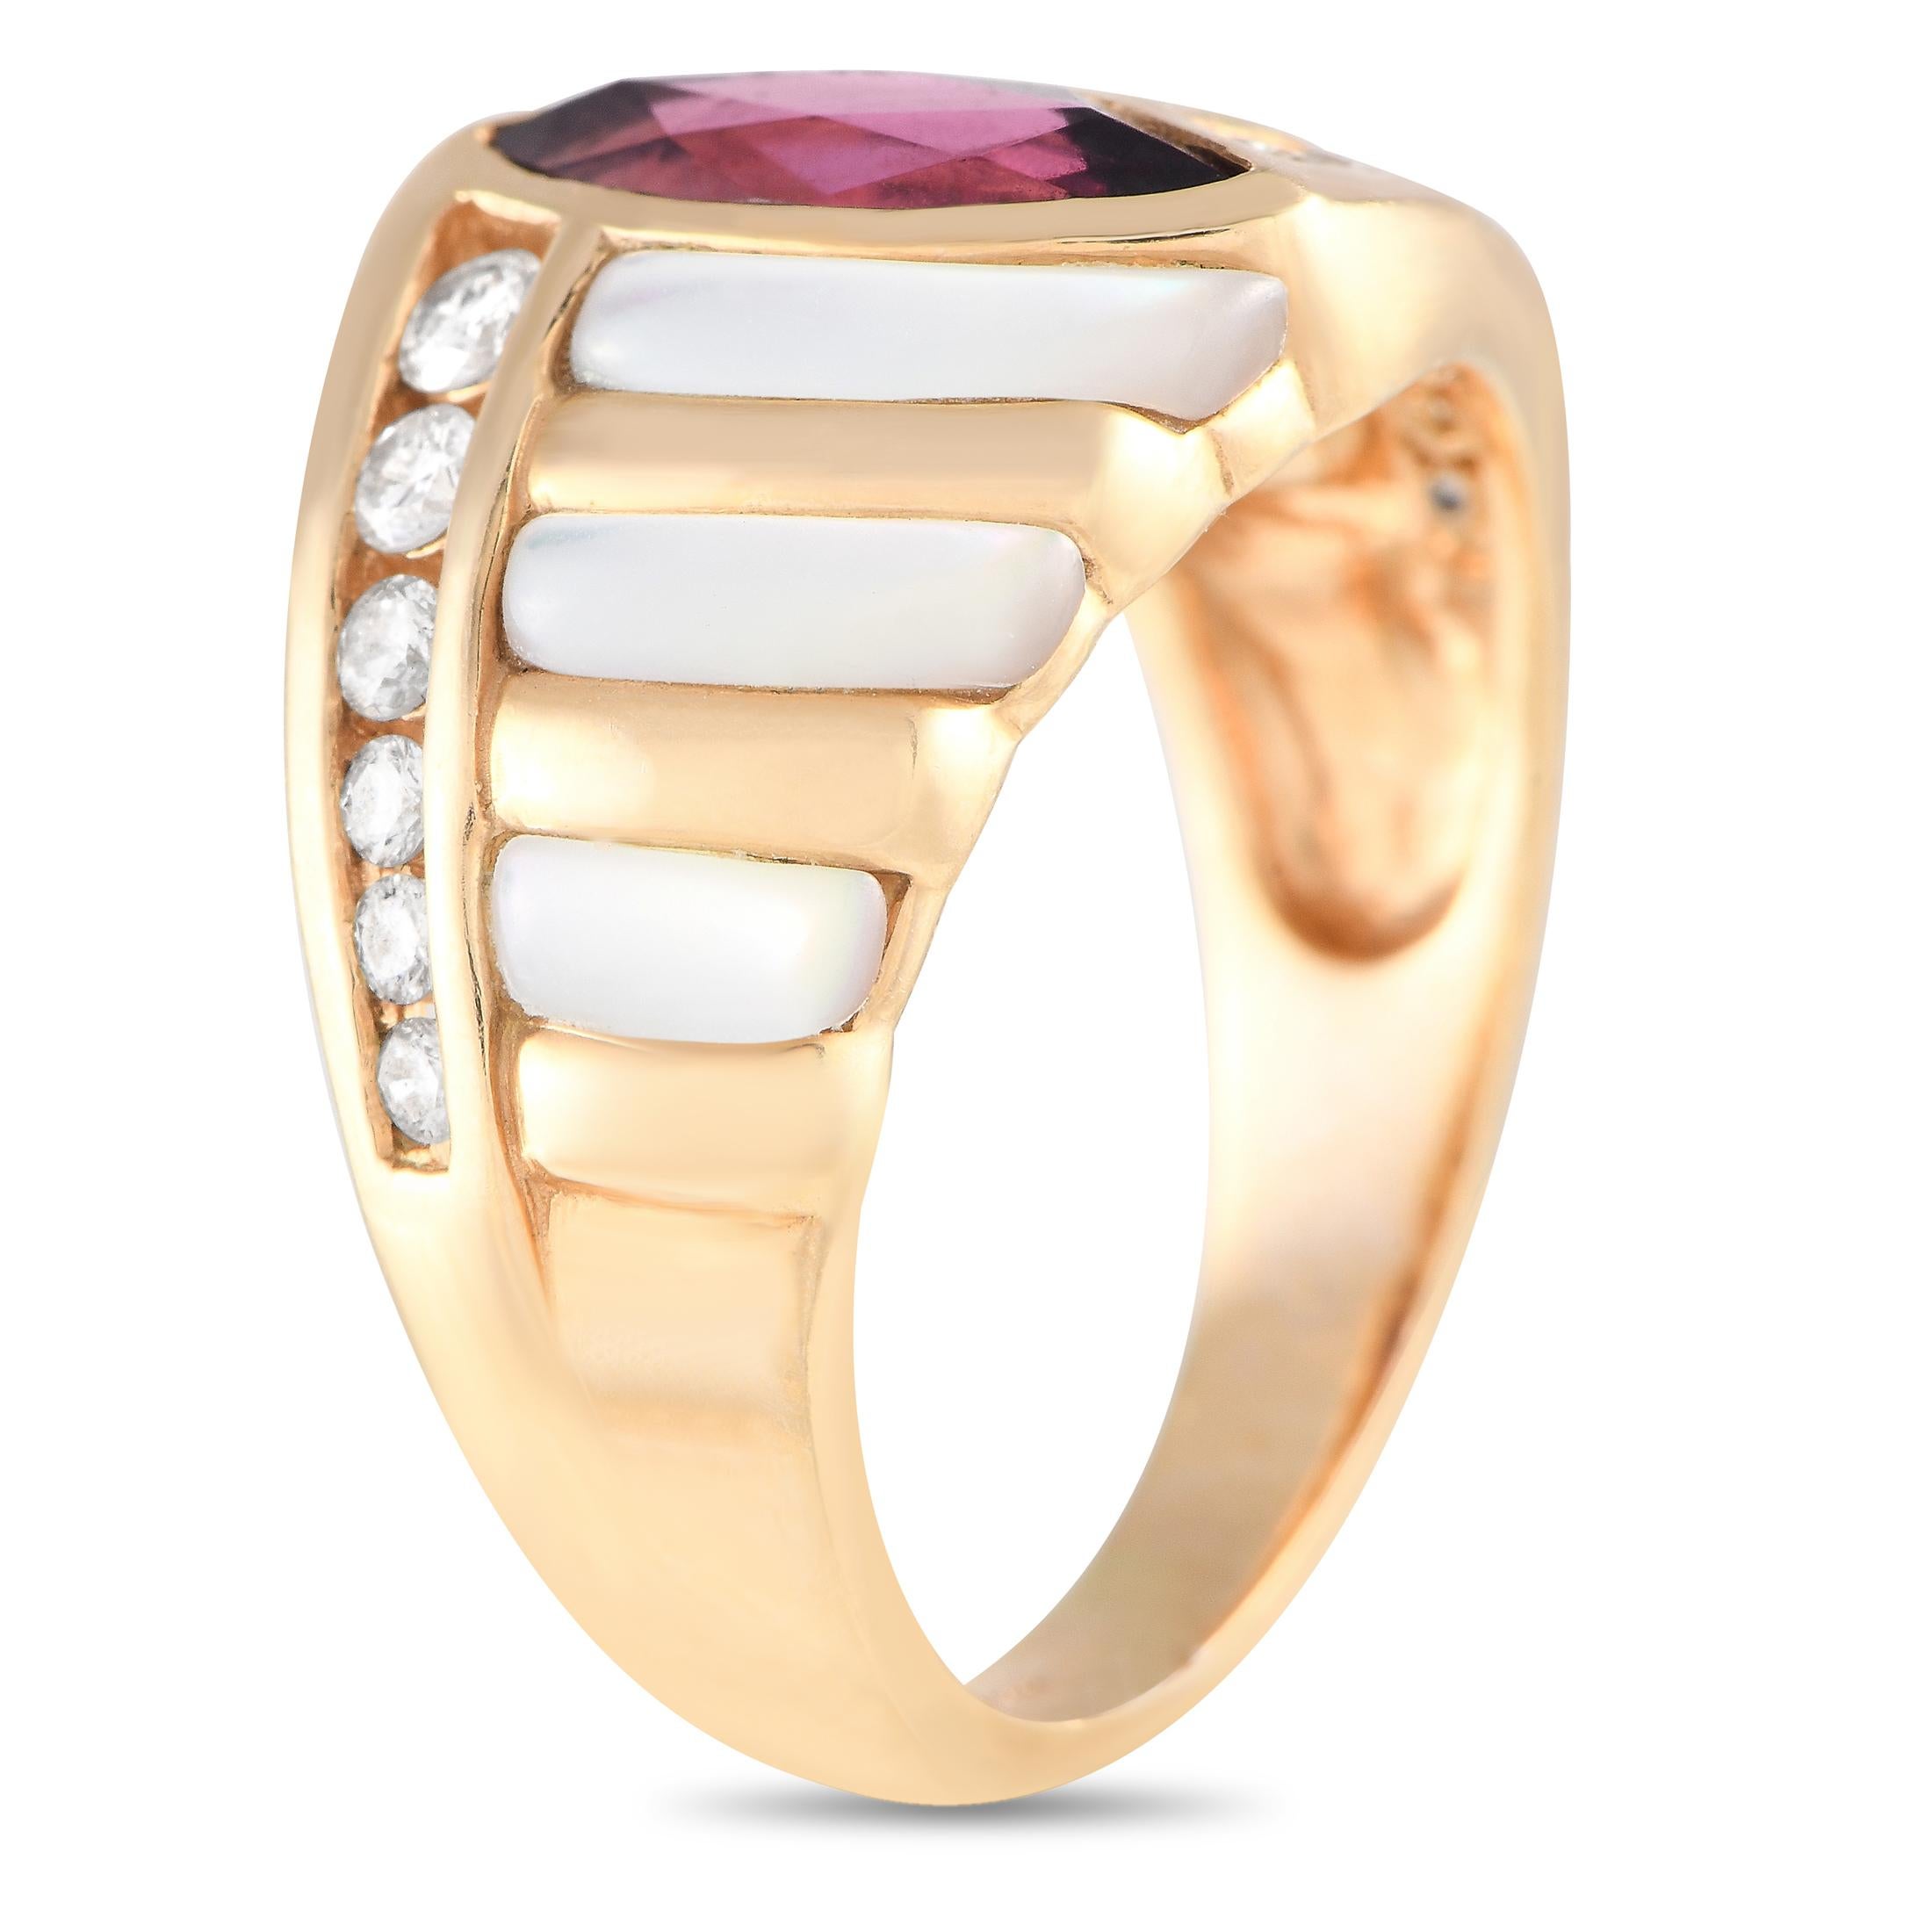 This Kabana creation is a sought-after jewel appreciated for its undeniable charm, creative style, and exquisite craftsmanship. It features a tapering band with a wide top housing a faceted marquise pink tourmaline set securely on a bezel. Two